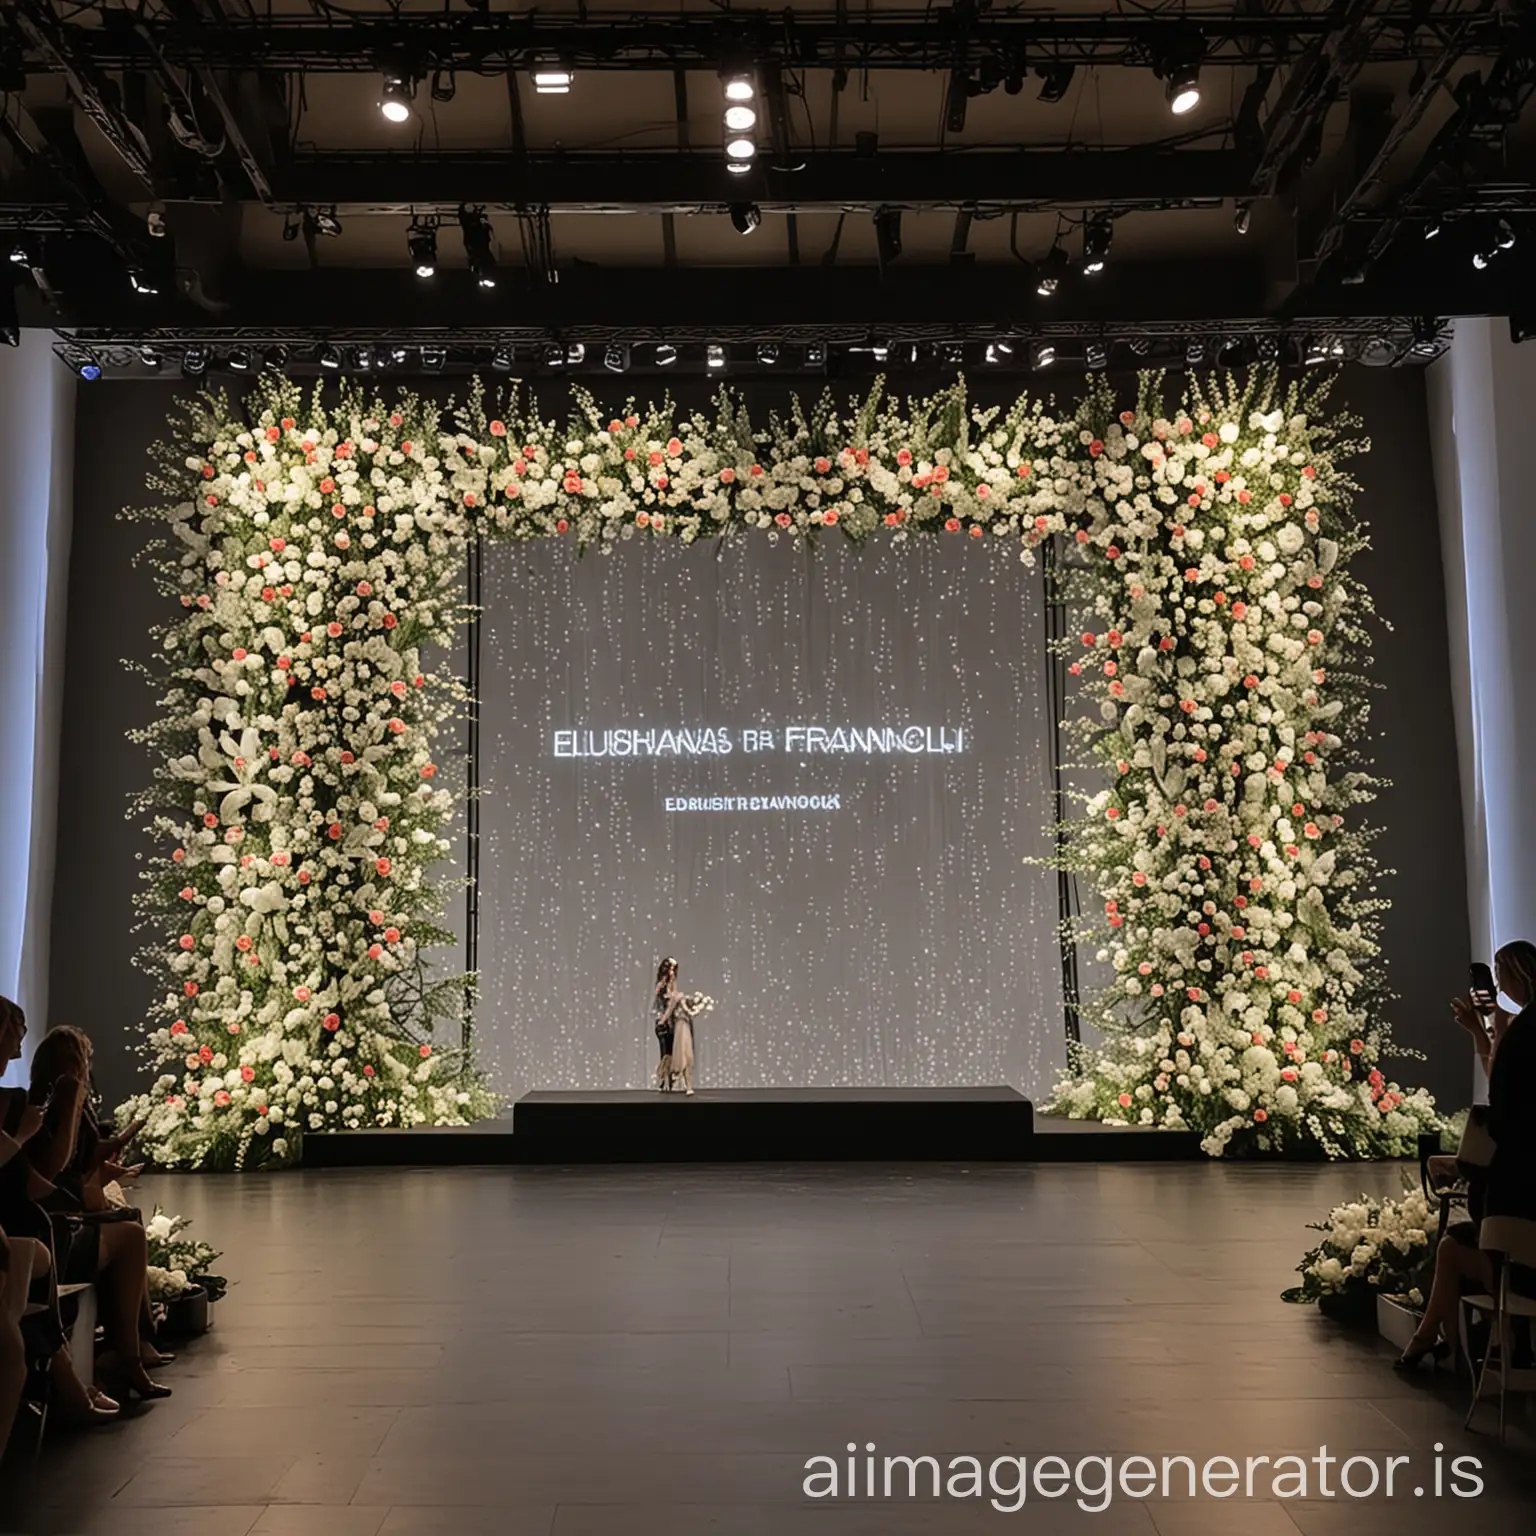 Led wall for the fashion show of Elisabetta franchi for pronovias with models flowers and runaway